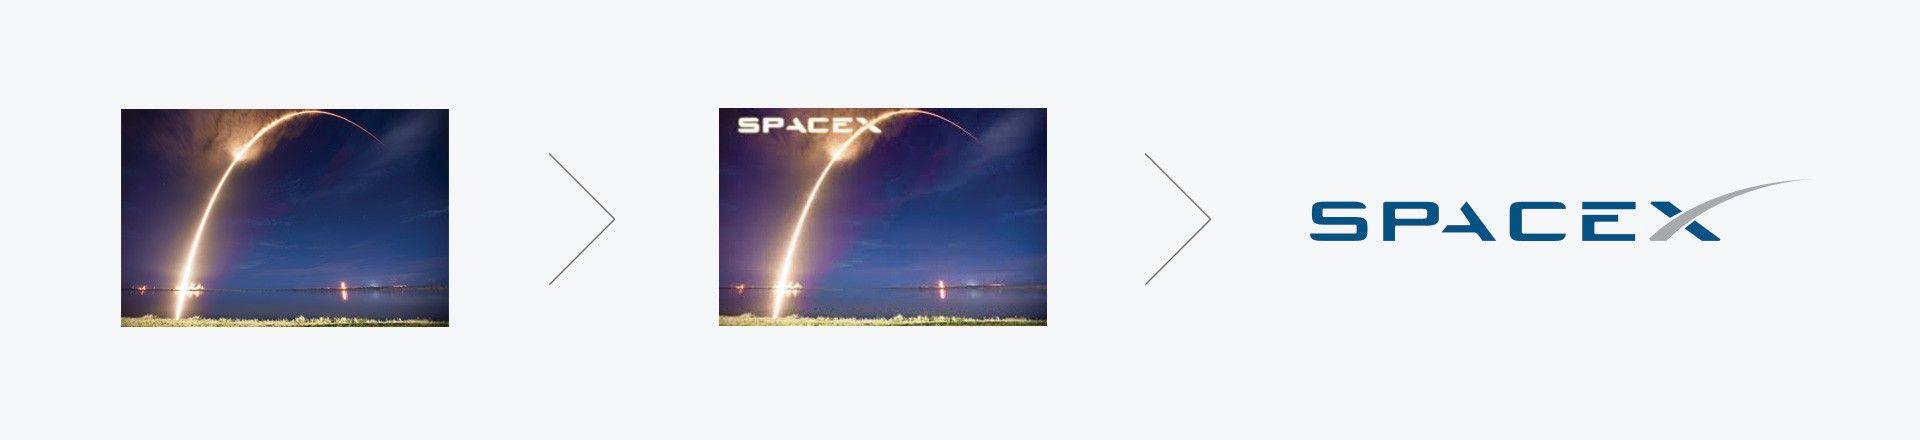 SpaceX Star Logo - Logos of Elon Musk's Brands: Tesla, SpaceX and The Boring Company ...